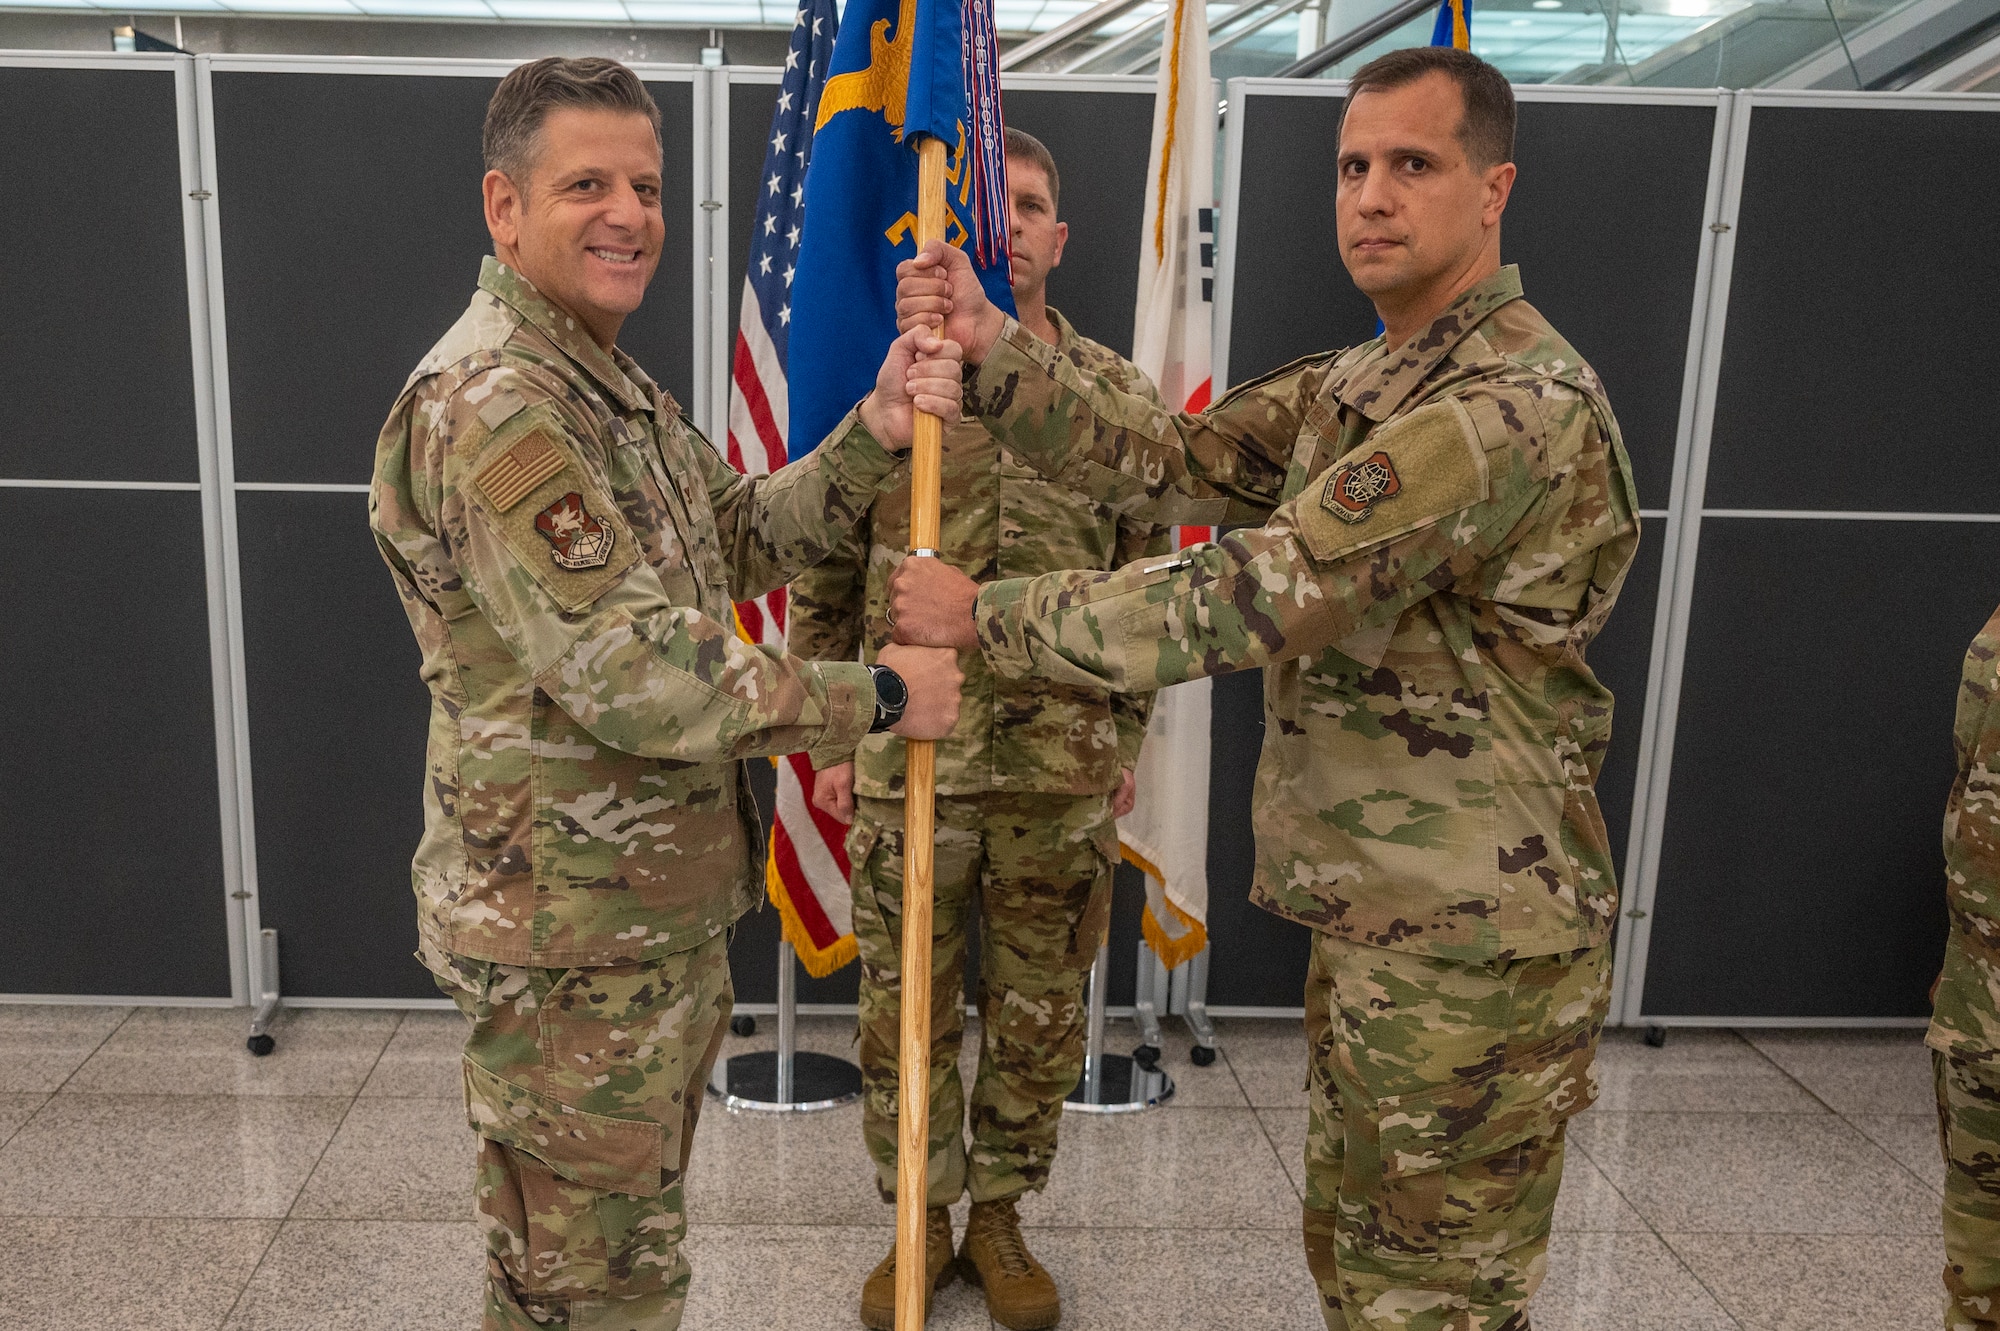 U.S. Air Force Col. Christopher Kiser, left, 515th Air Mobility Operations Group commander, presents the guidon to Lt. Col. Luke Berreckman, 731st Air Mobility Squadron incoming commander, as a symbol of his taking command at Osan Air Base, Republic of Korea, June 23, 2023. Prior to taking command, Berreckman served as the nuclear operations branch chief at headquarters, Air Mobility Command Inspector General Nuclear Division.  (U.S. Air Force photo by Senior Airman Aaron Edwards)